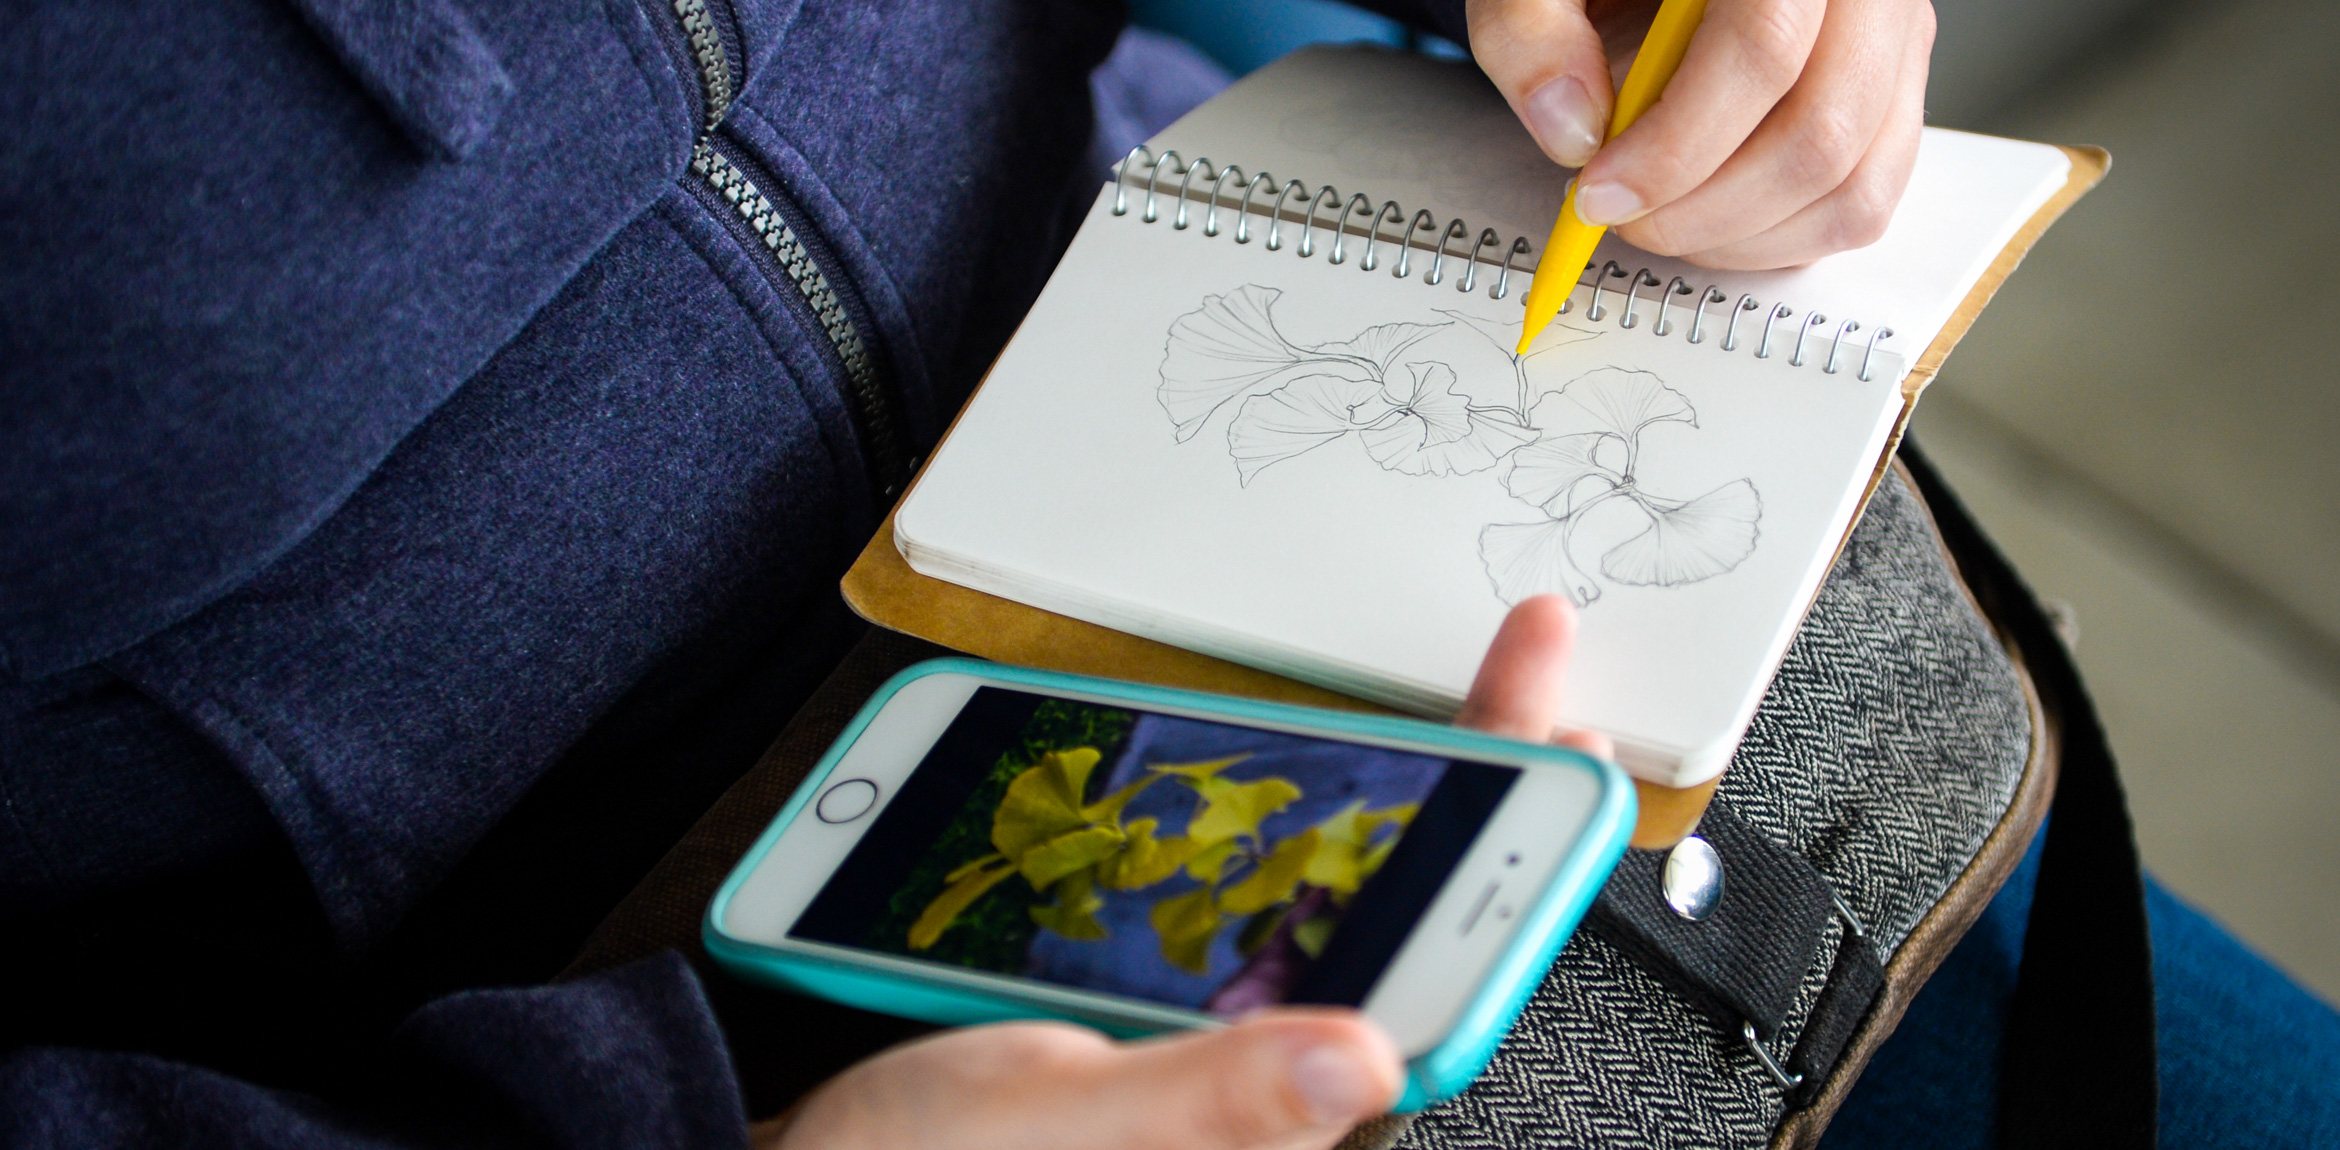 An artist sketches gingko leaves on a notepad and holds a phone displaying a reference image.